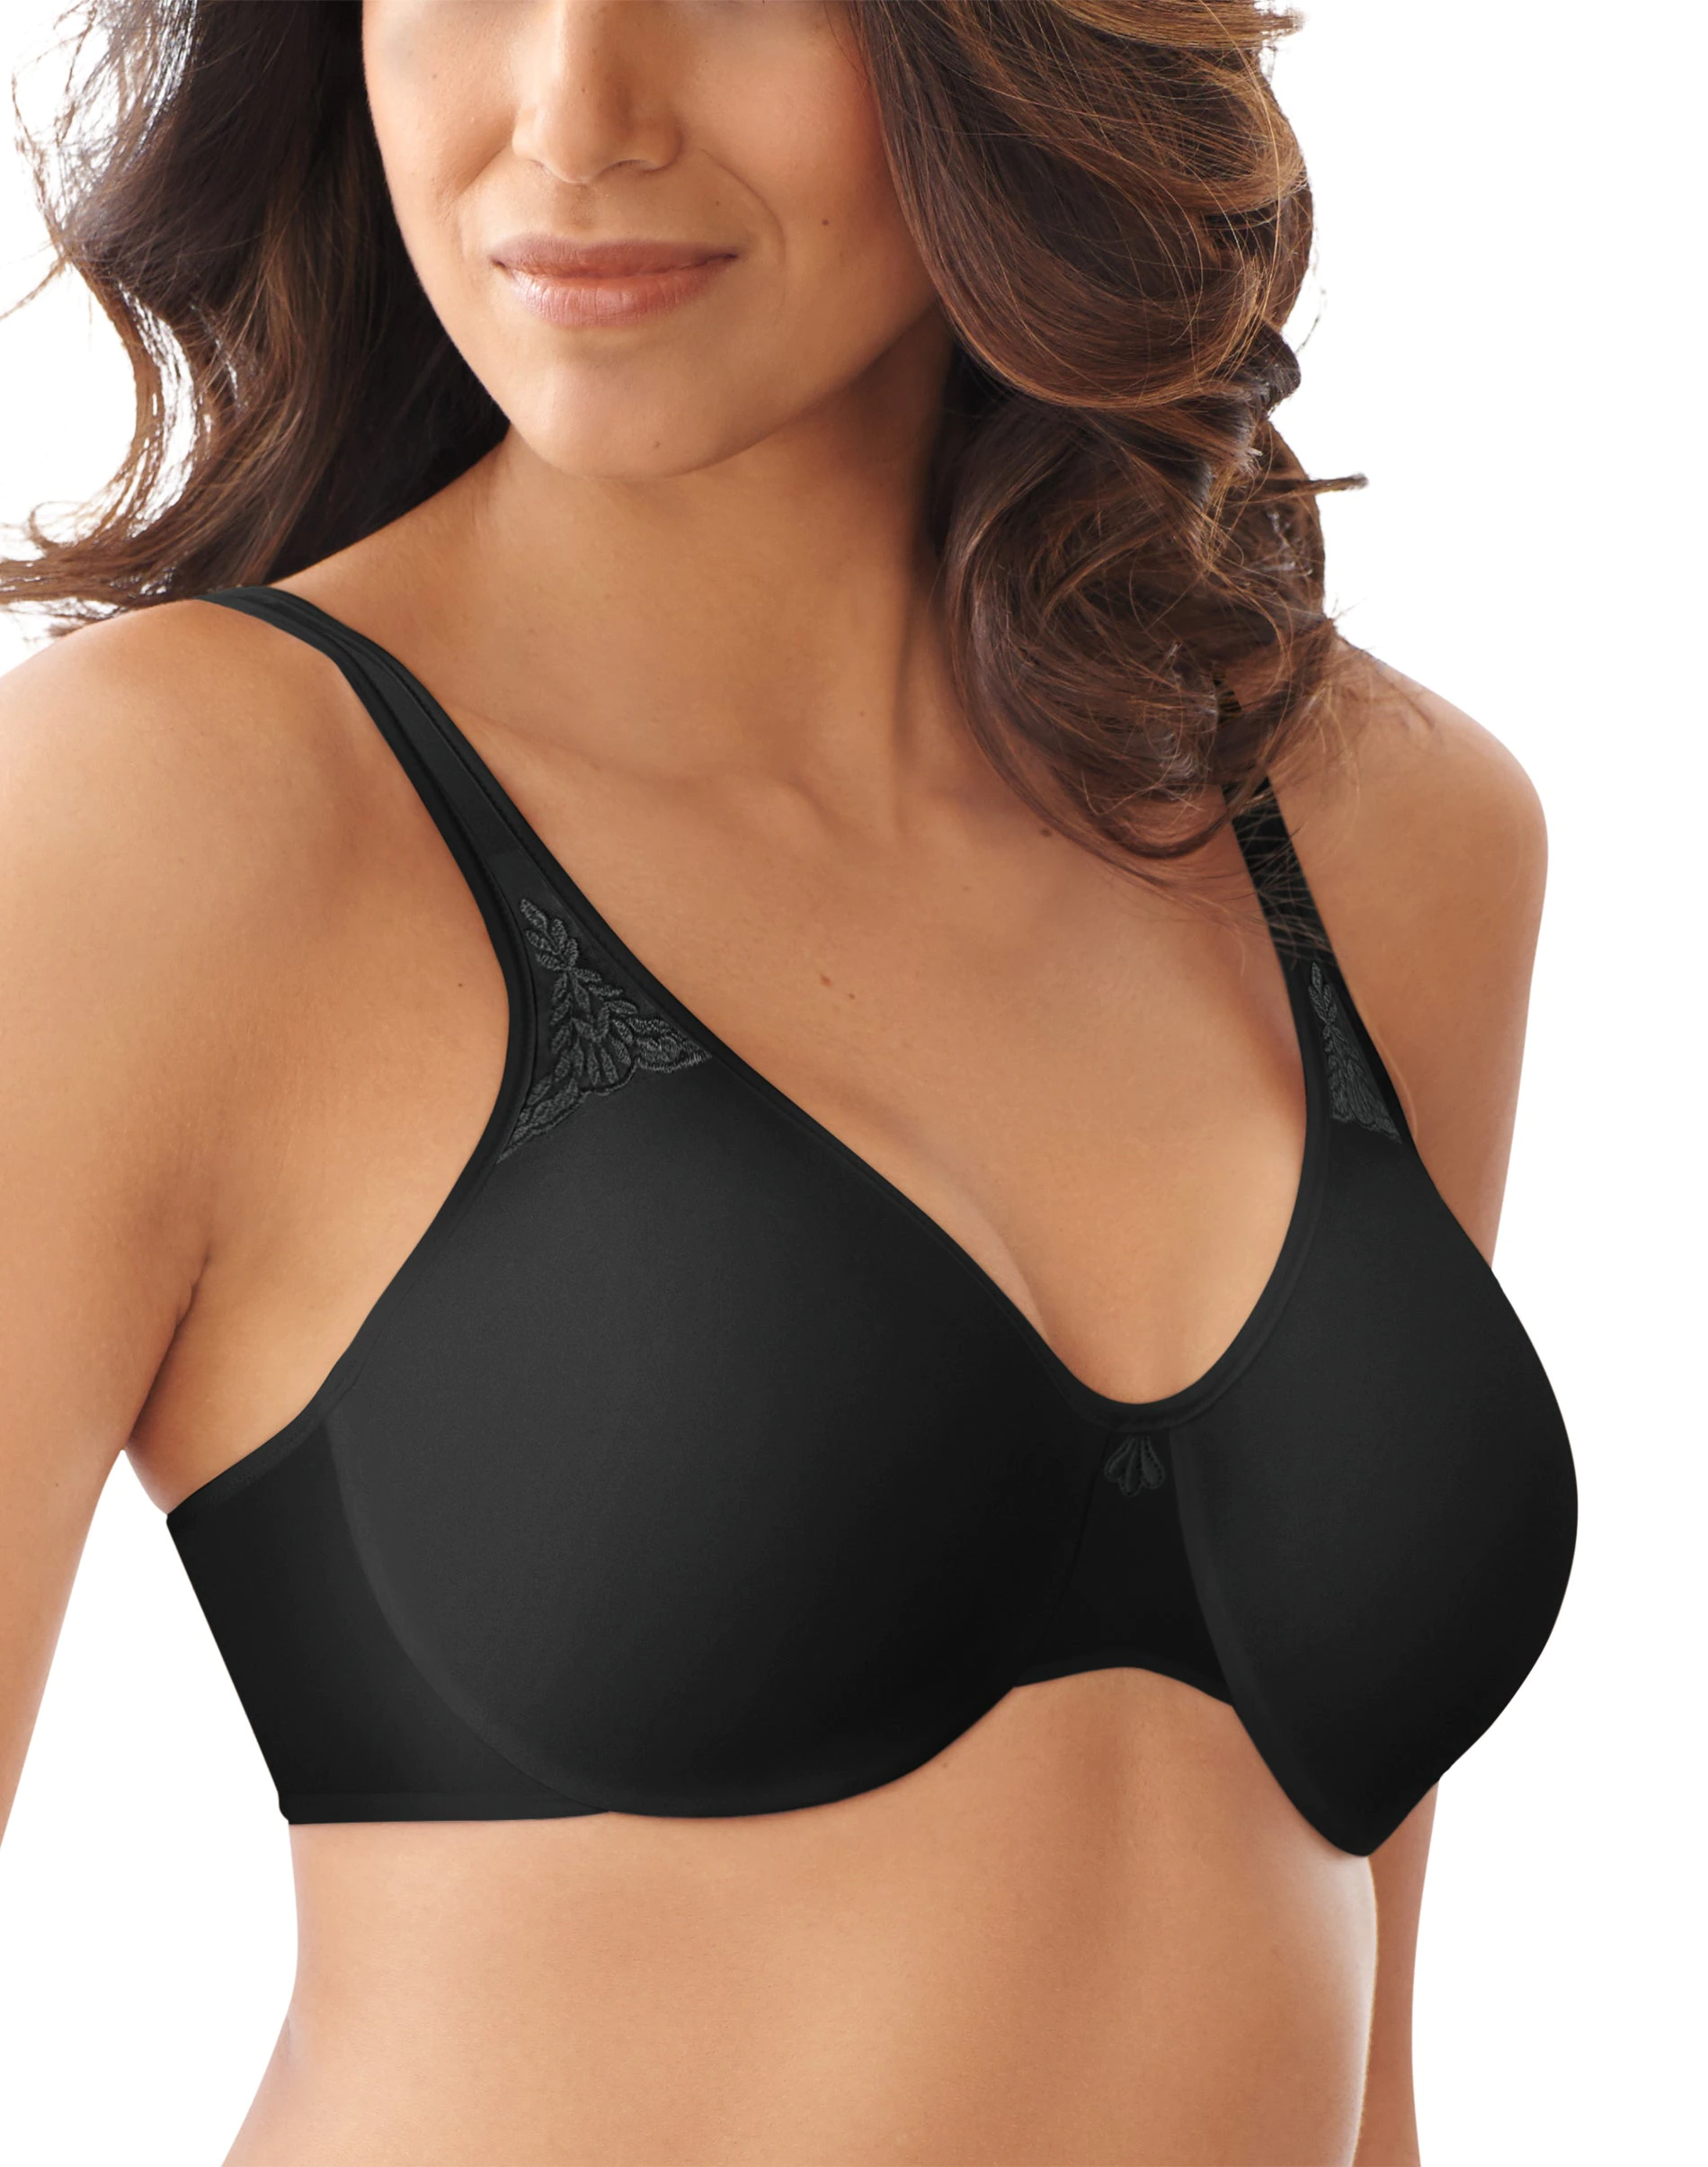 BALI Passion for Comfort® Minimizer Underwire – B3385X - Basics by Mail